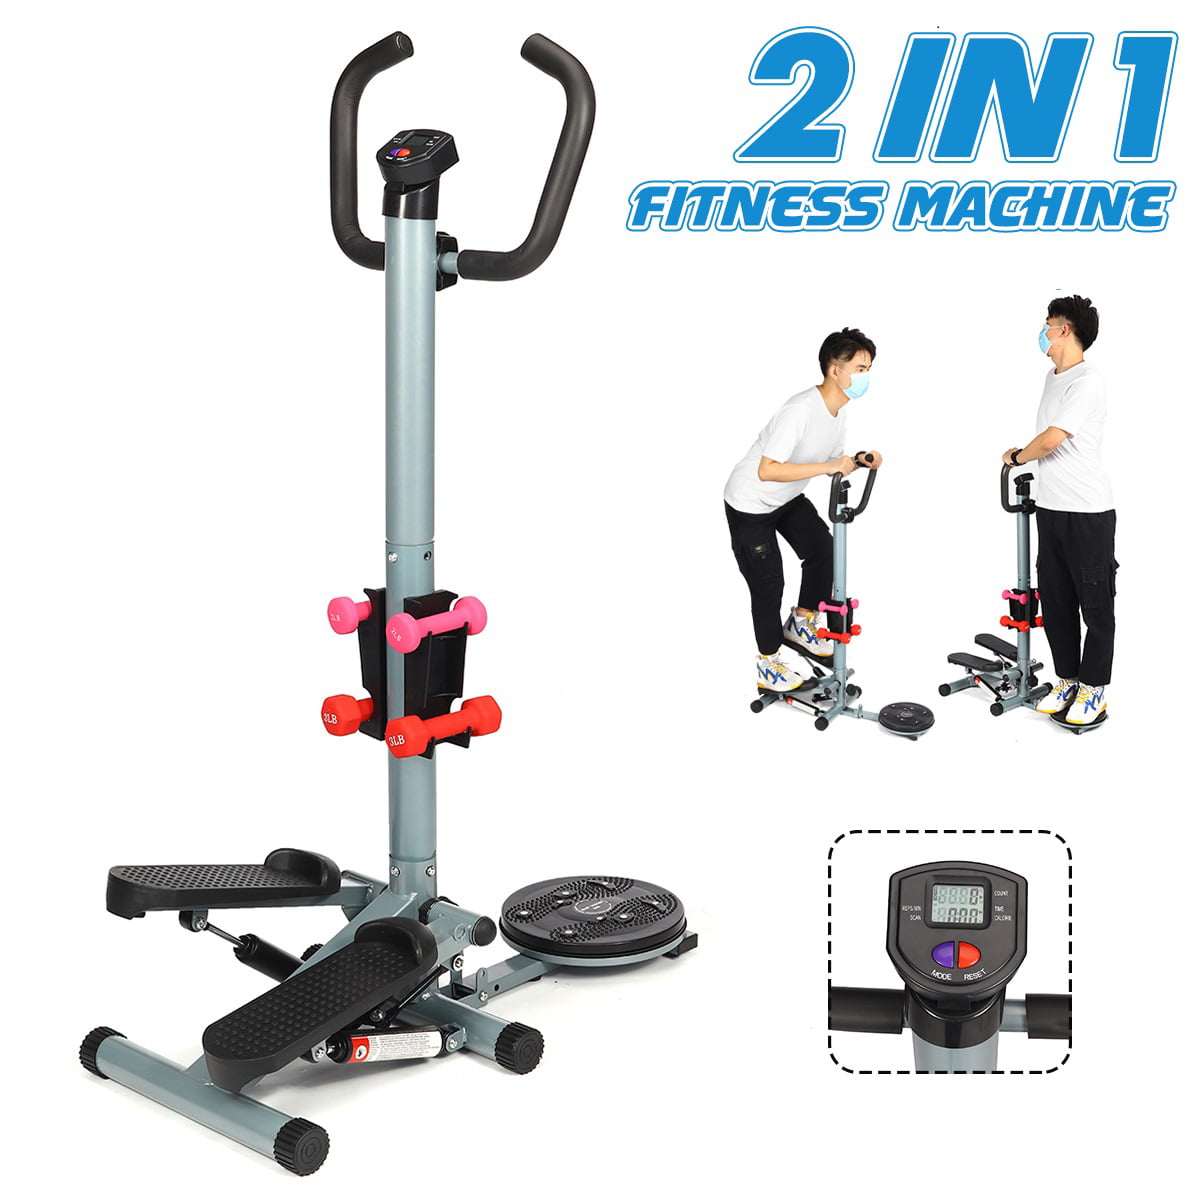 Waist and Hips Maximum User Weight 150 kg Sin Mini 2-in-1 Fitness Stepper with Training Rope and Multifunctional Screen 2 Step Stepper Leg Exercises